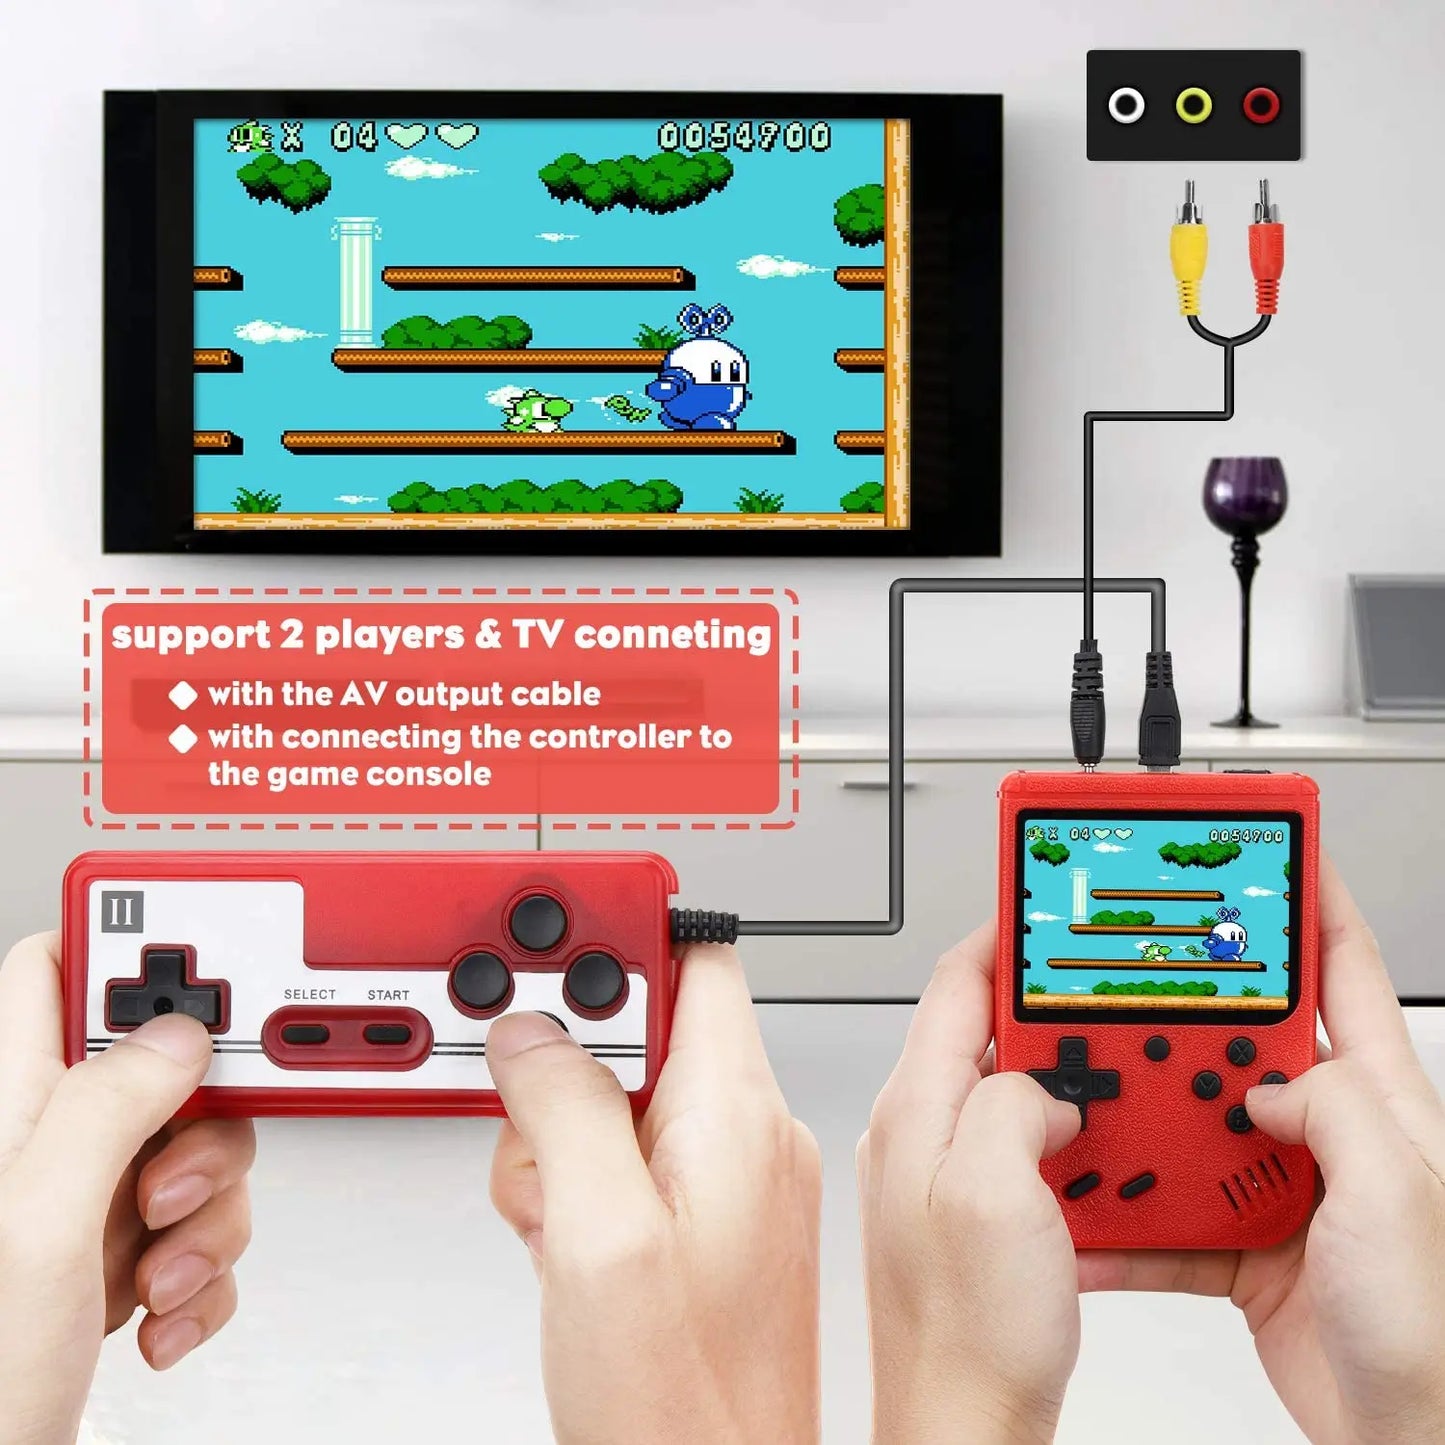 Optimize product title: Portable Retro Gaming Console Two Player Gamepads - Ideal for Kids and Retro Game Enthusiasts